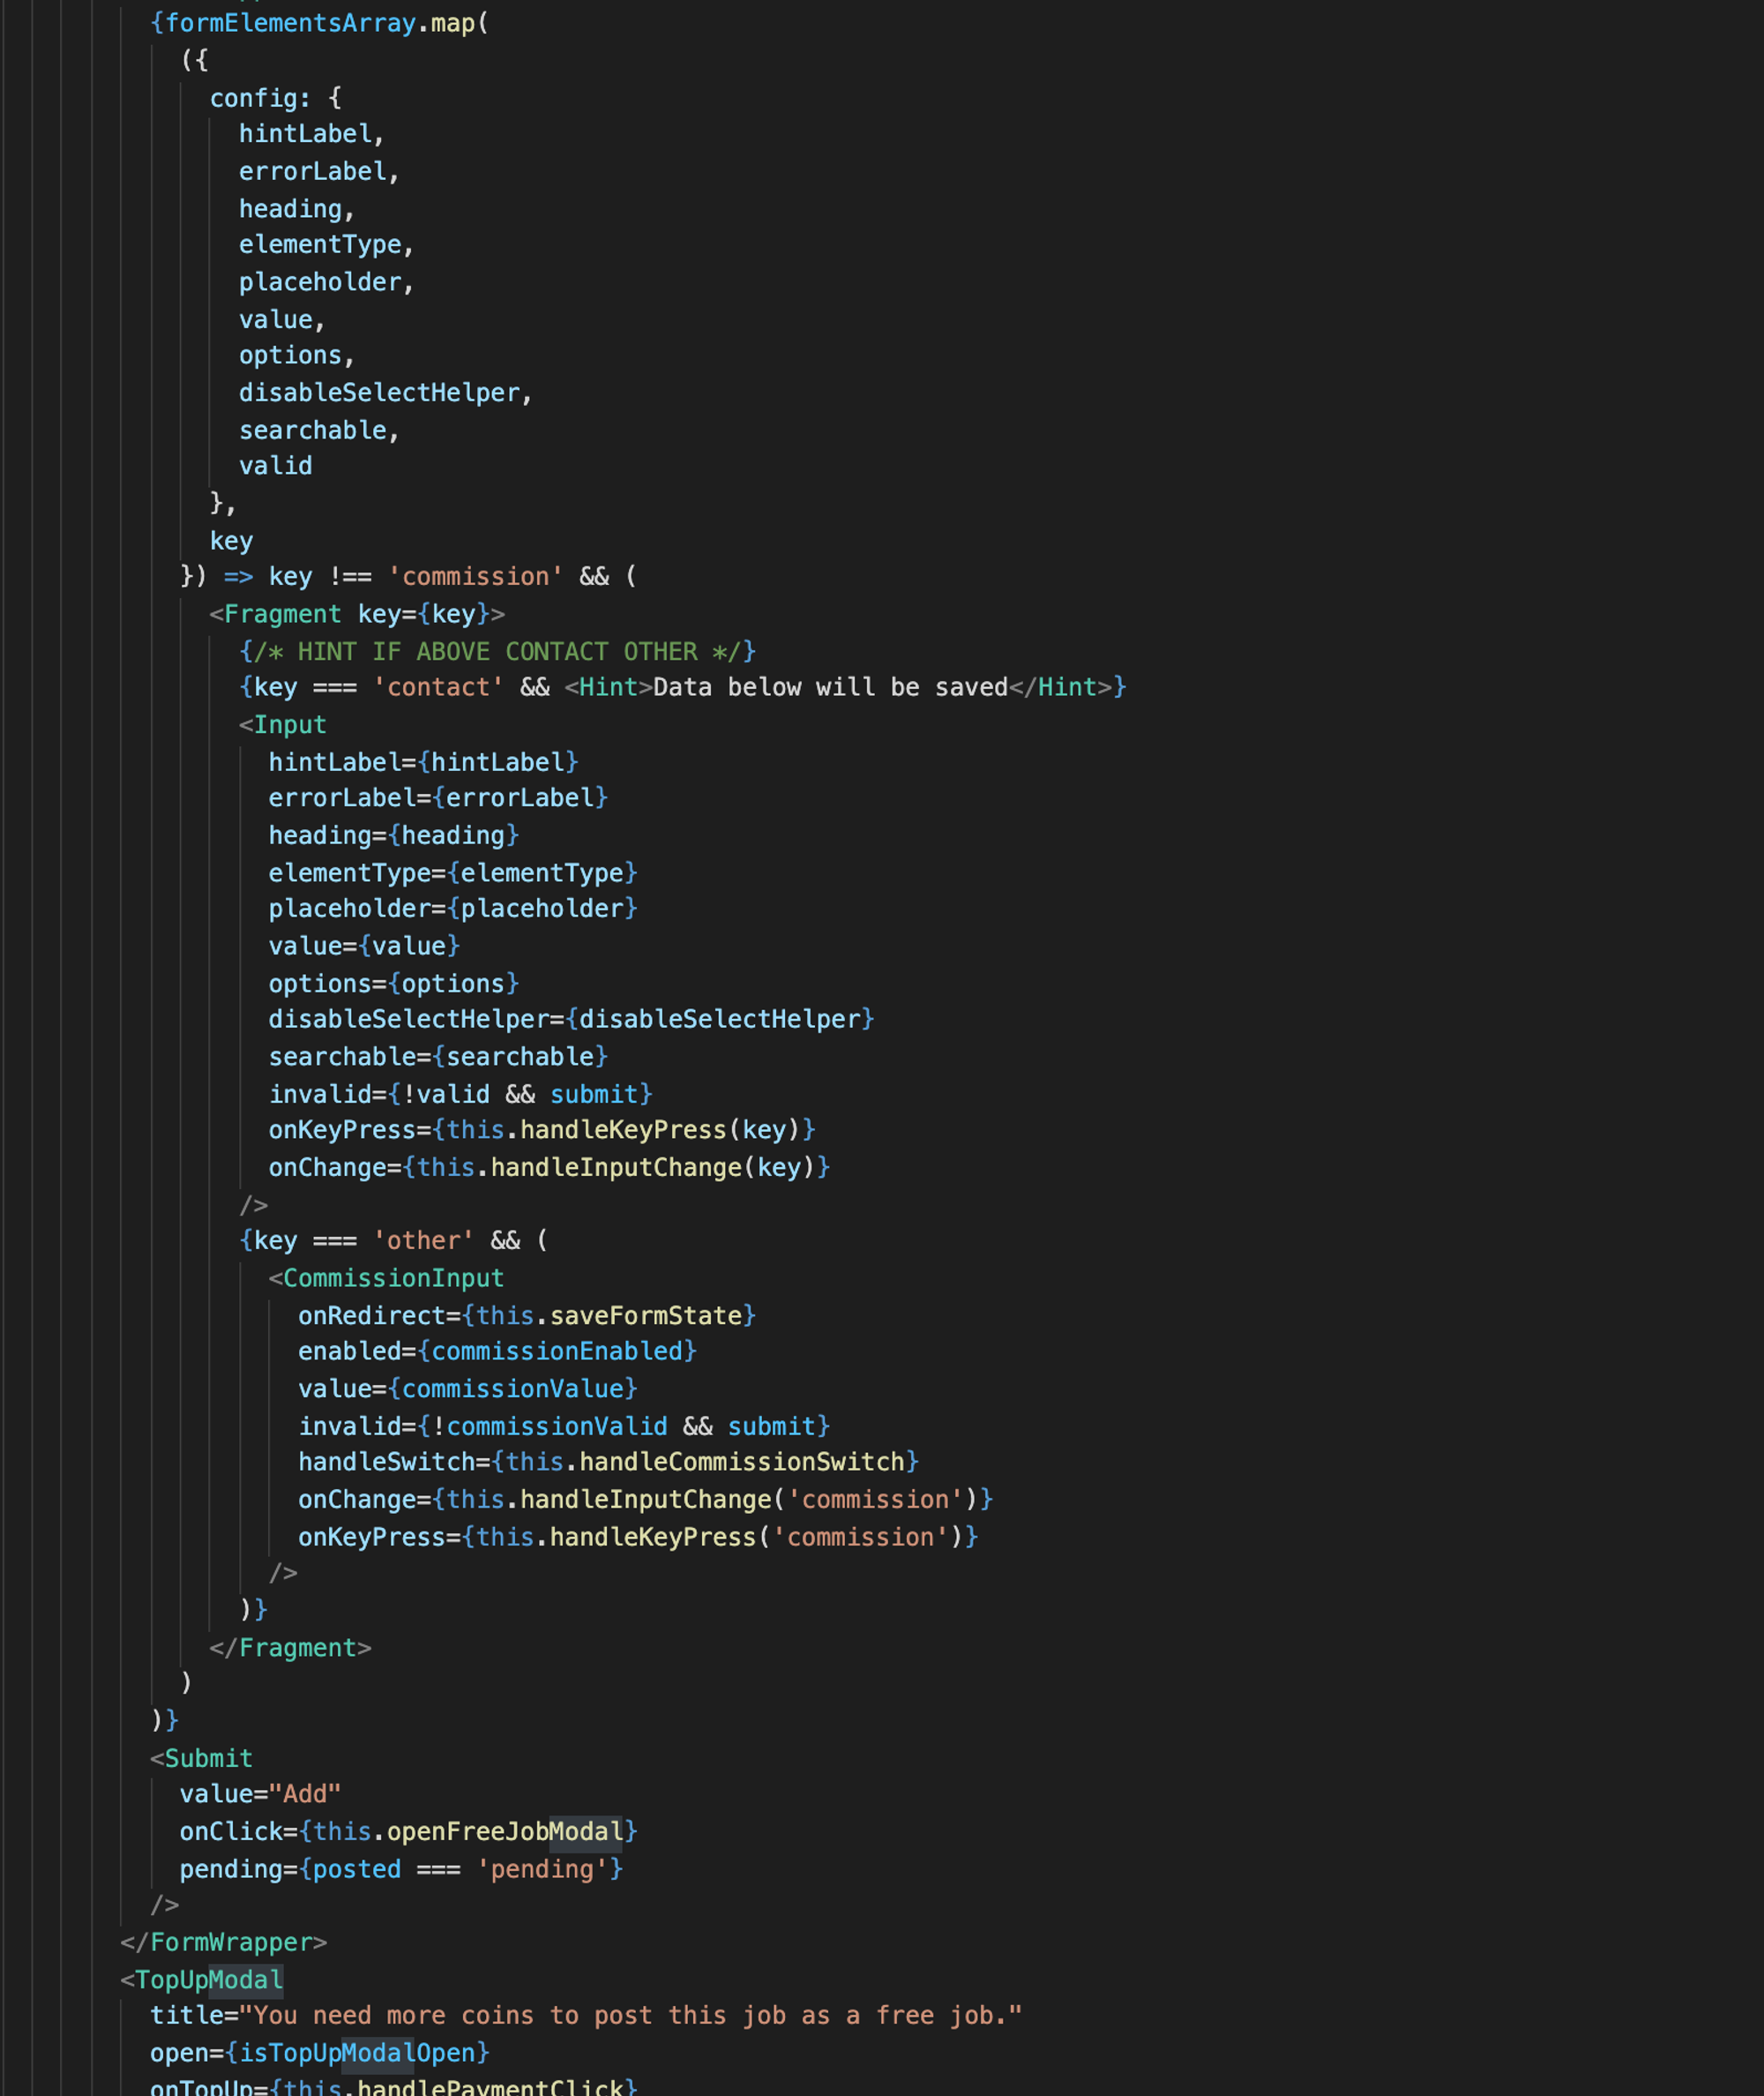 2 year old code. My React.js skills are getting rusty 🤢